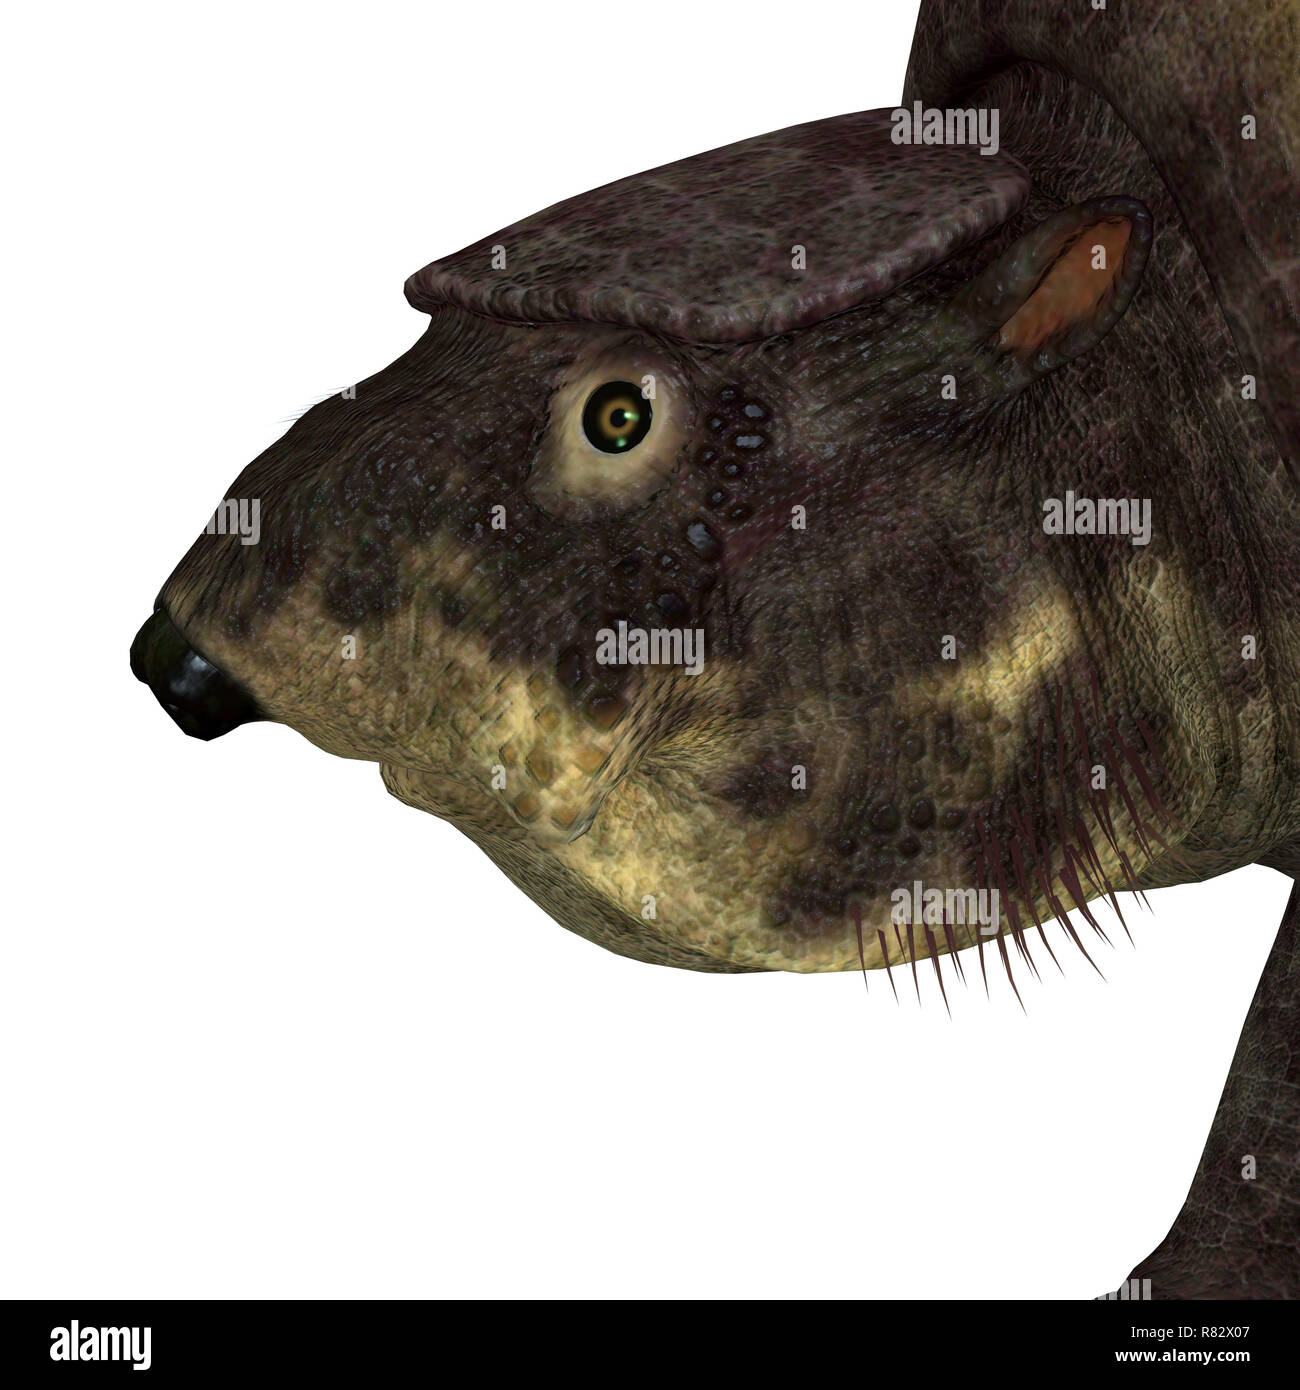 Glyptodont Mammal Head - Glyptodont was a herbivorous mammal that lived in North America during the Pleistocene Period. Stock Photo